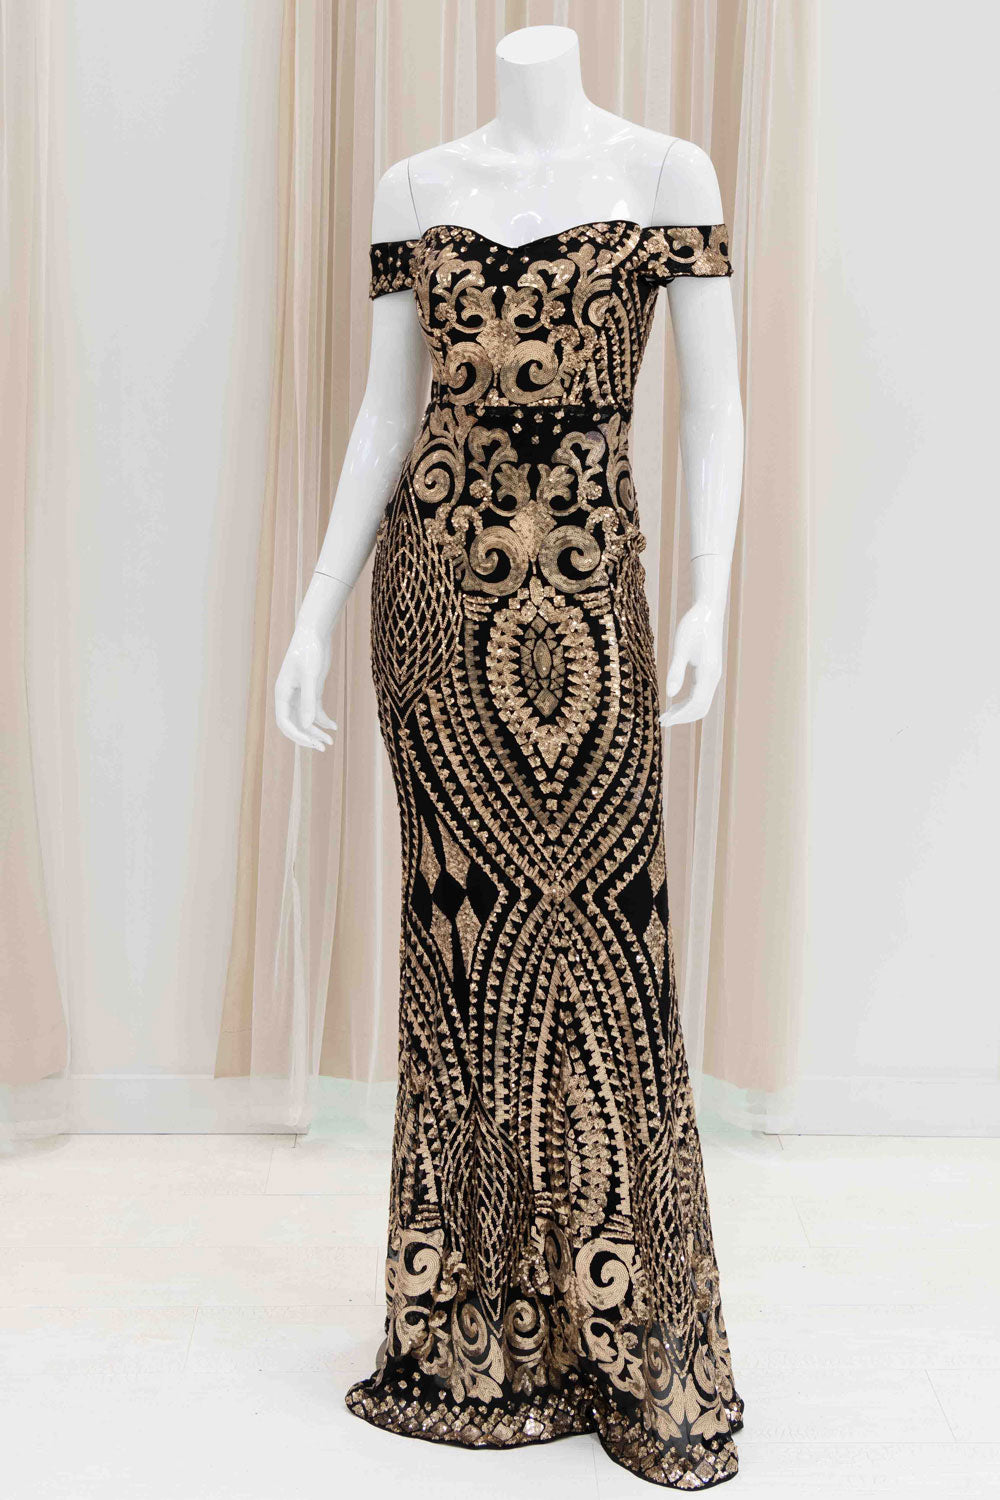 Black and Gold Roaring 20th Evening Gown